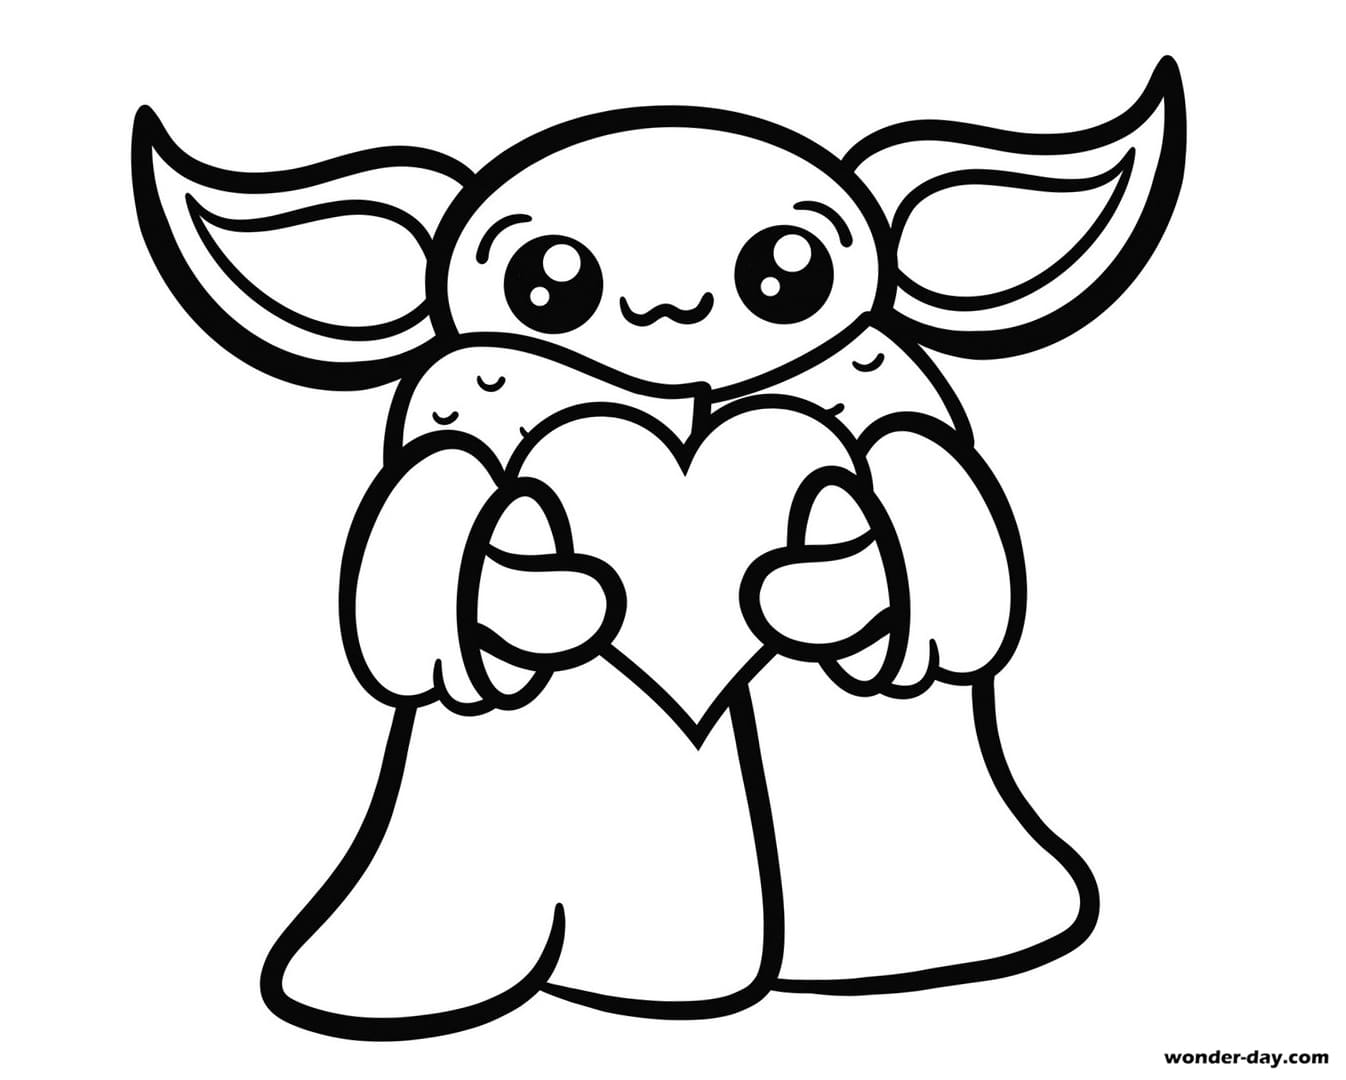 Download Baby Yoda Coloring Pages Free Printable Wonder Day Coloring Pages For Children And Adults